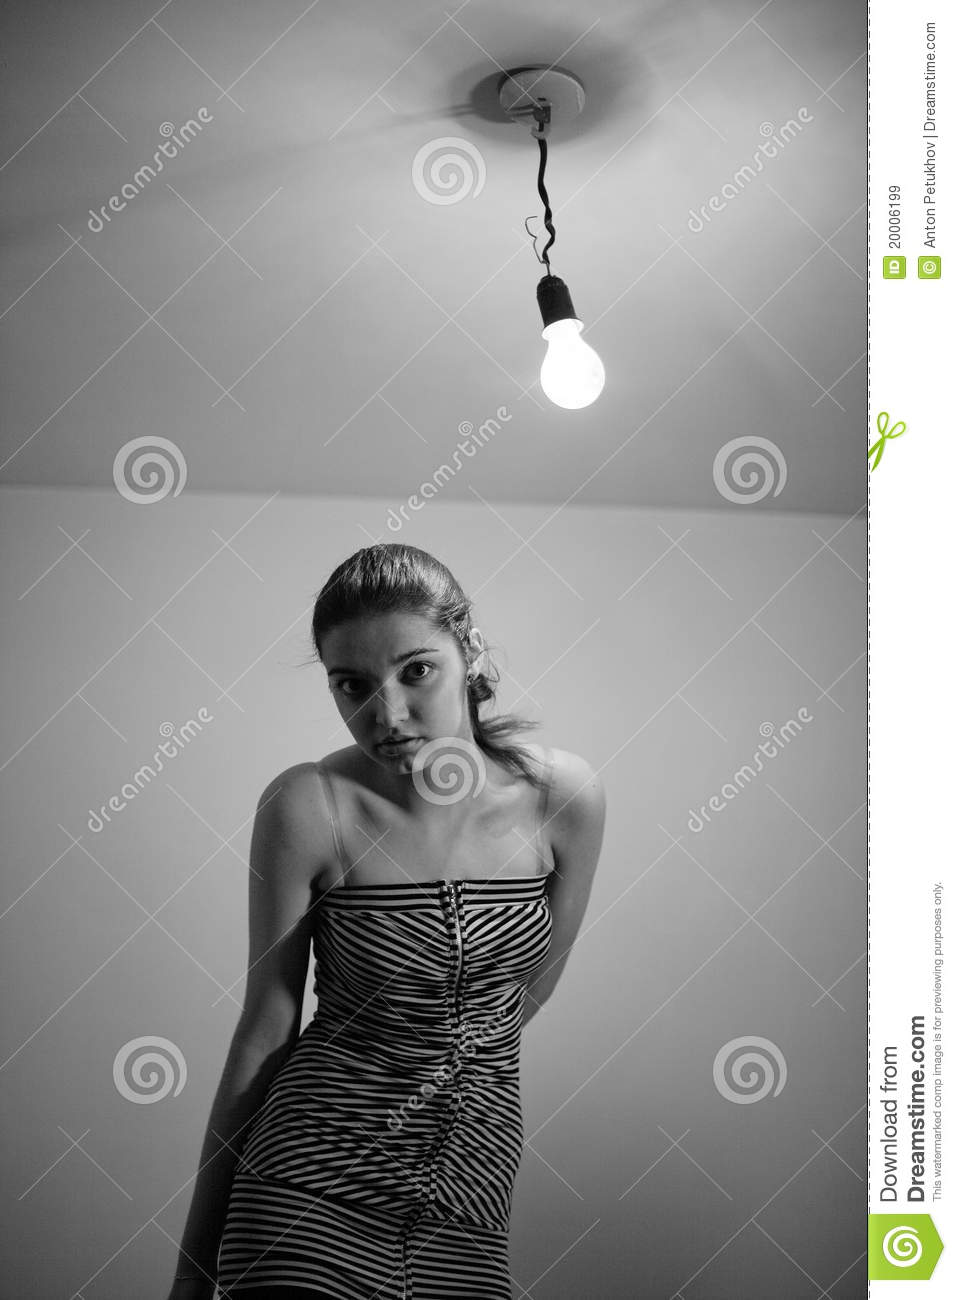 Young woman and light bulb stock image. Image of ganging - 20006199